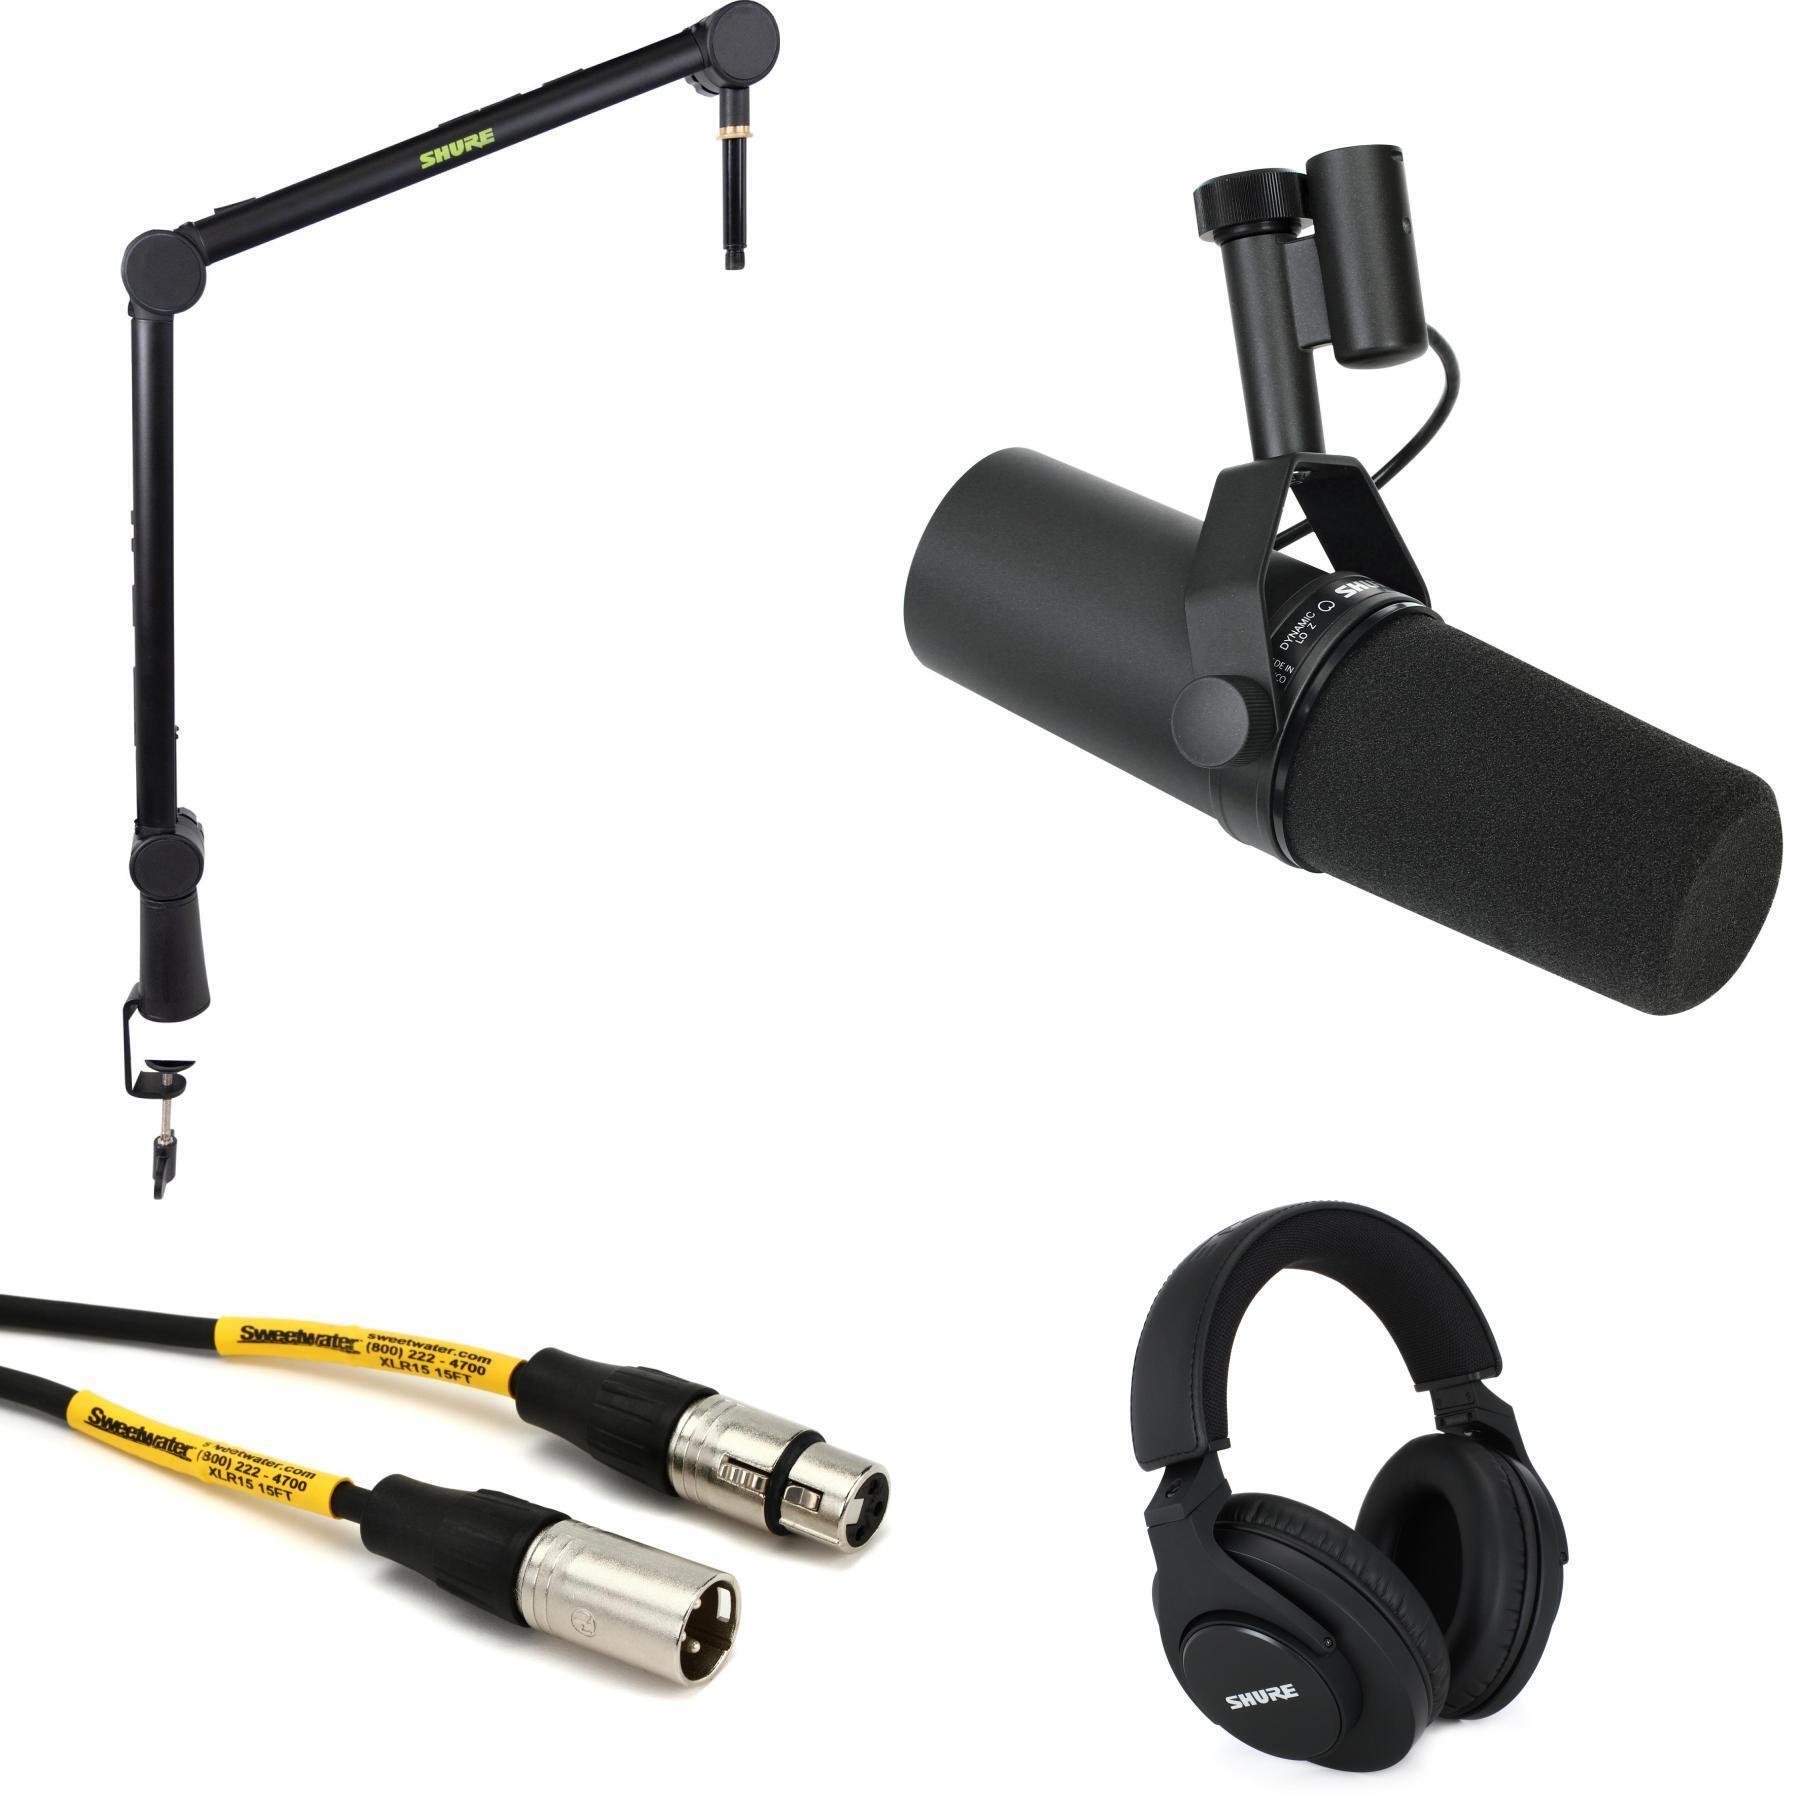  Shure SM7B Vocal Microphone with Cloud Microphones Cloudlifter  CL-1 Mic Activator and Extra 10' XLR Cable Bundle : Musical Instruments